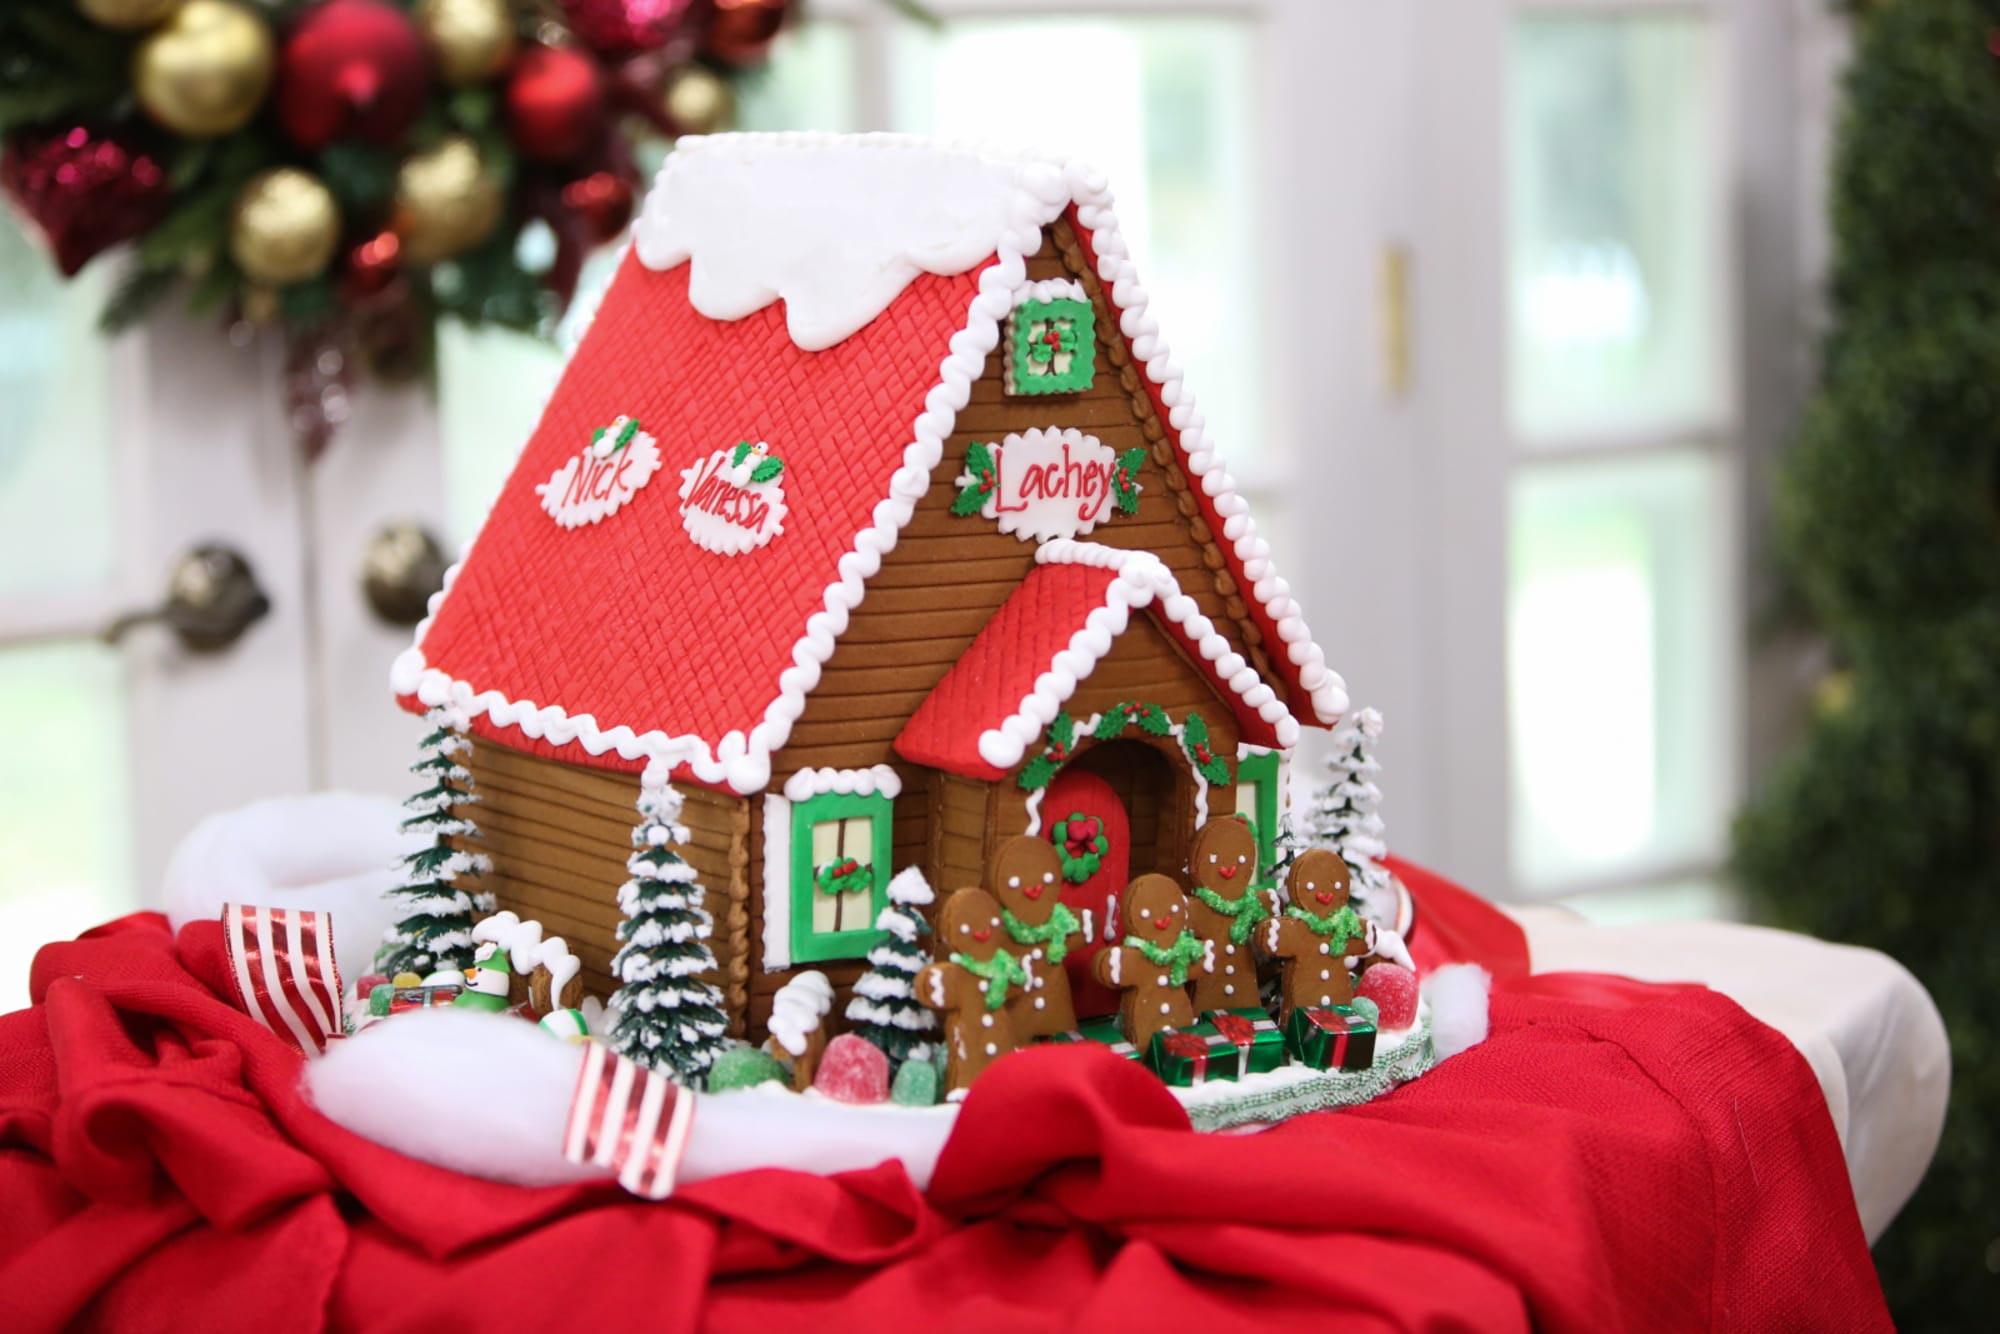 Tastiest ways to celebrate National Gingerbread House Day